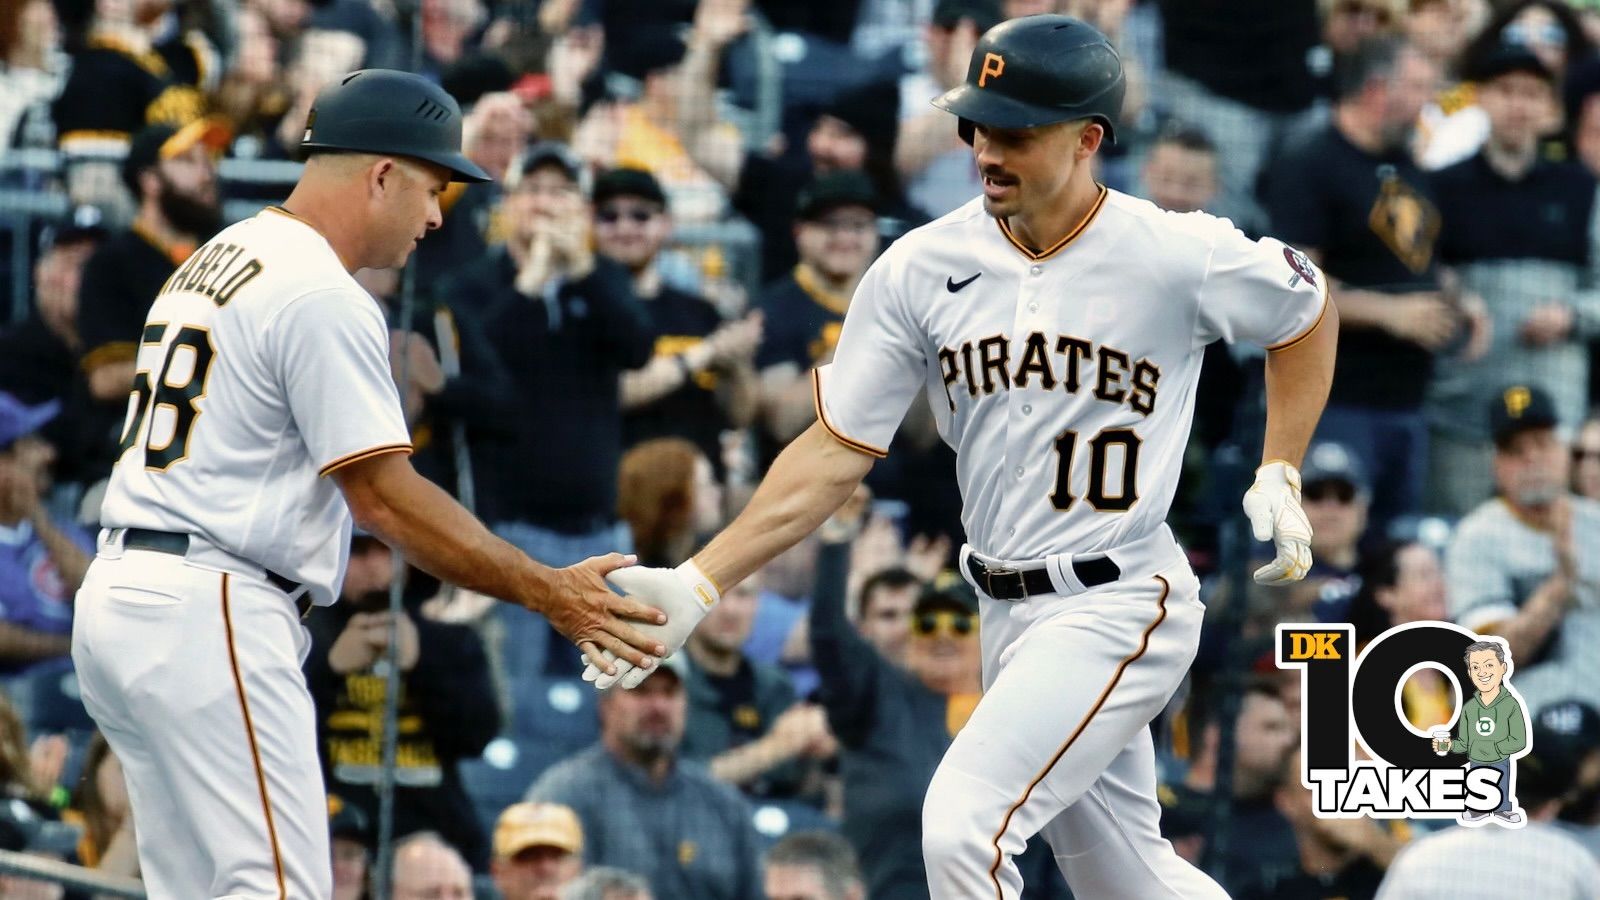 Even when the Pirates lose, Bob Nutting wins - Beyond the Box Score